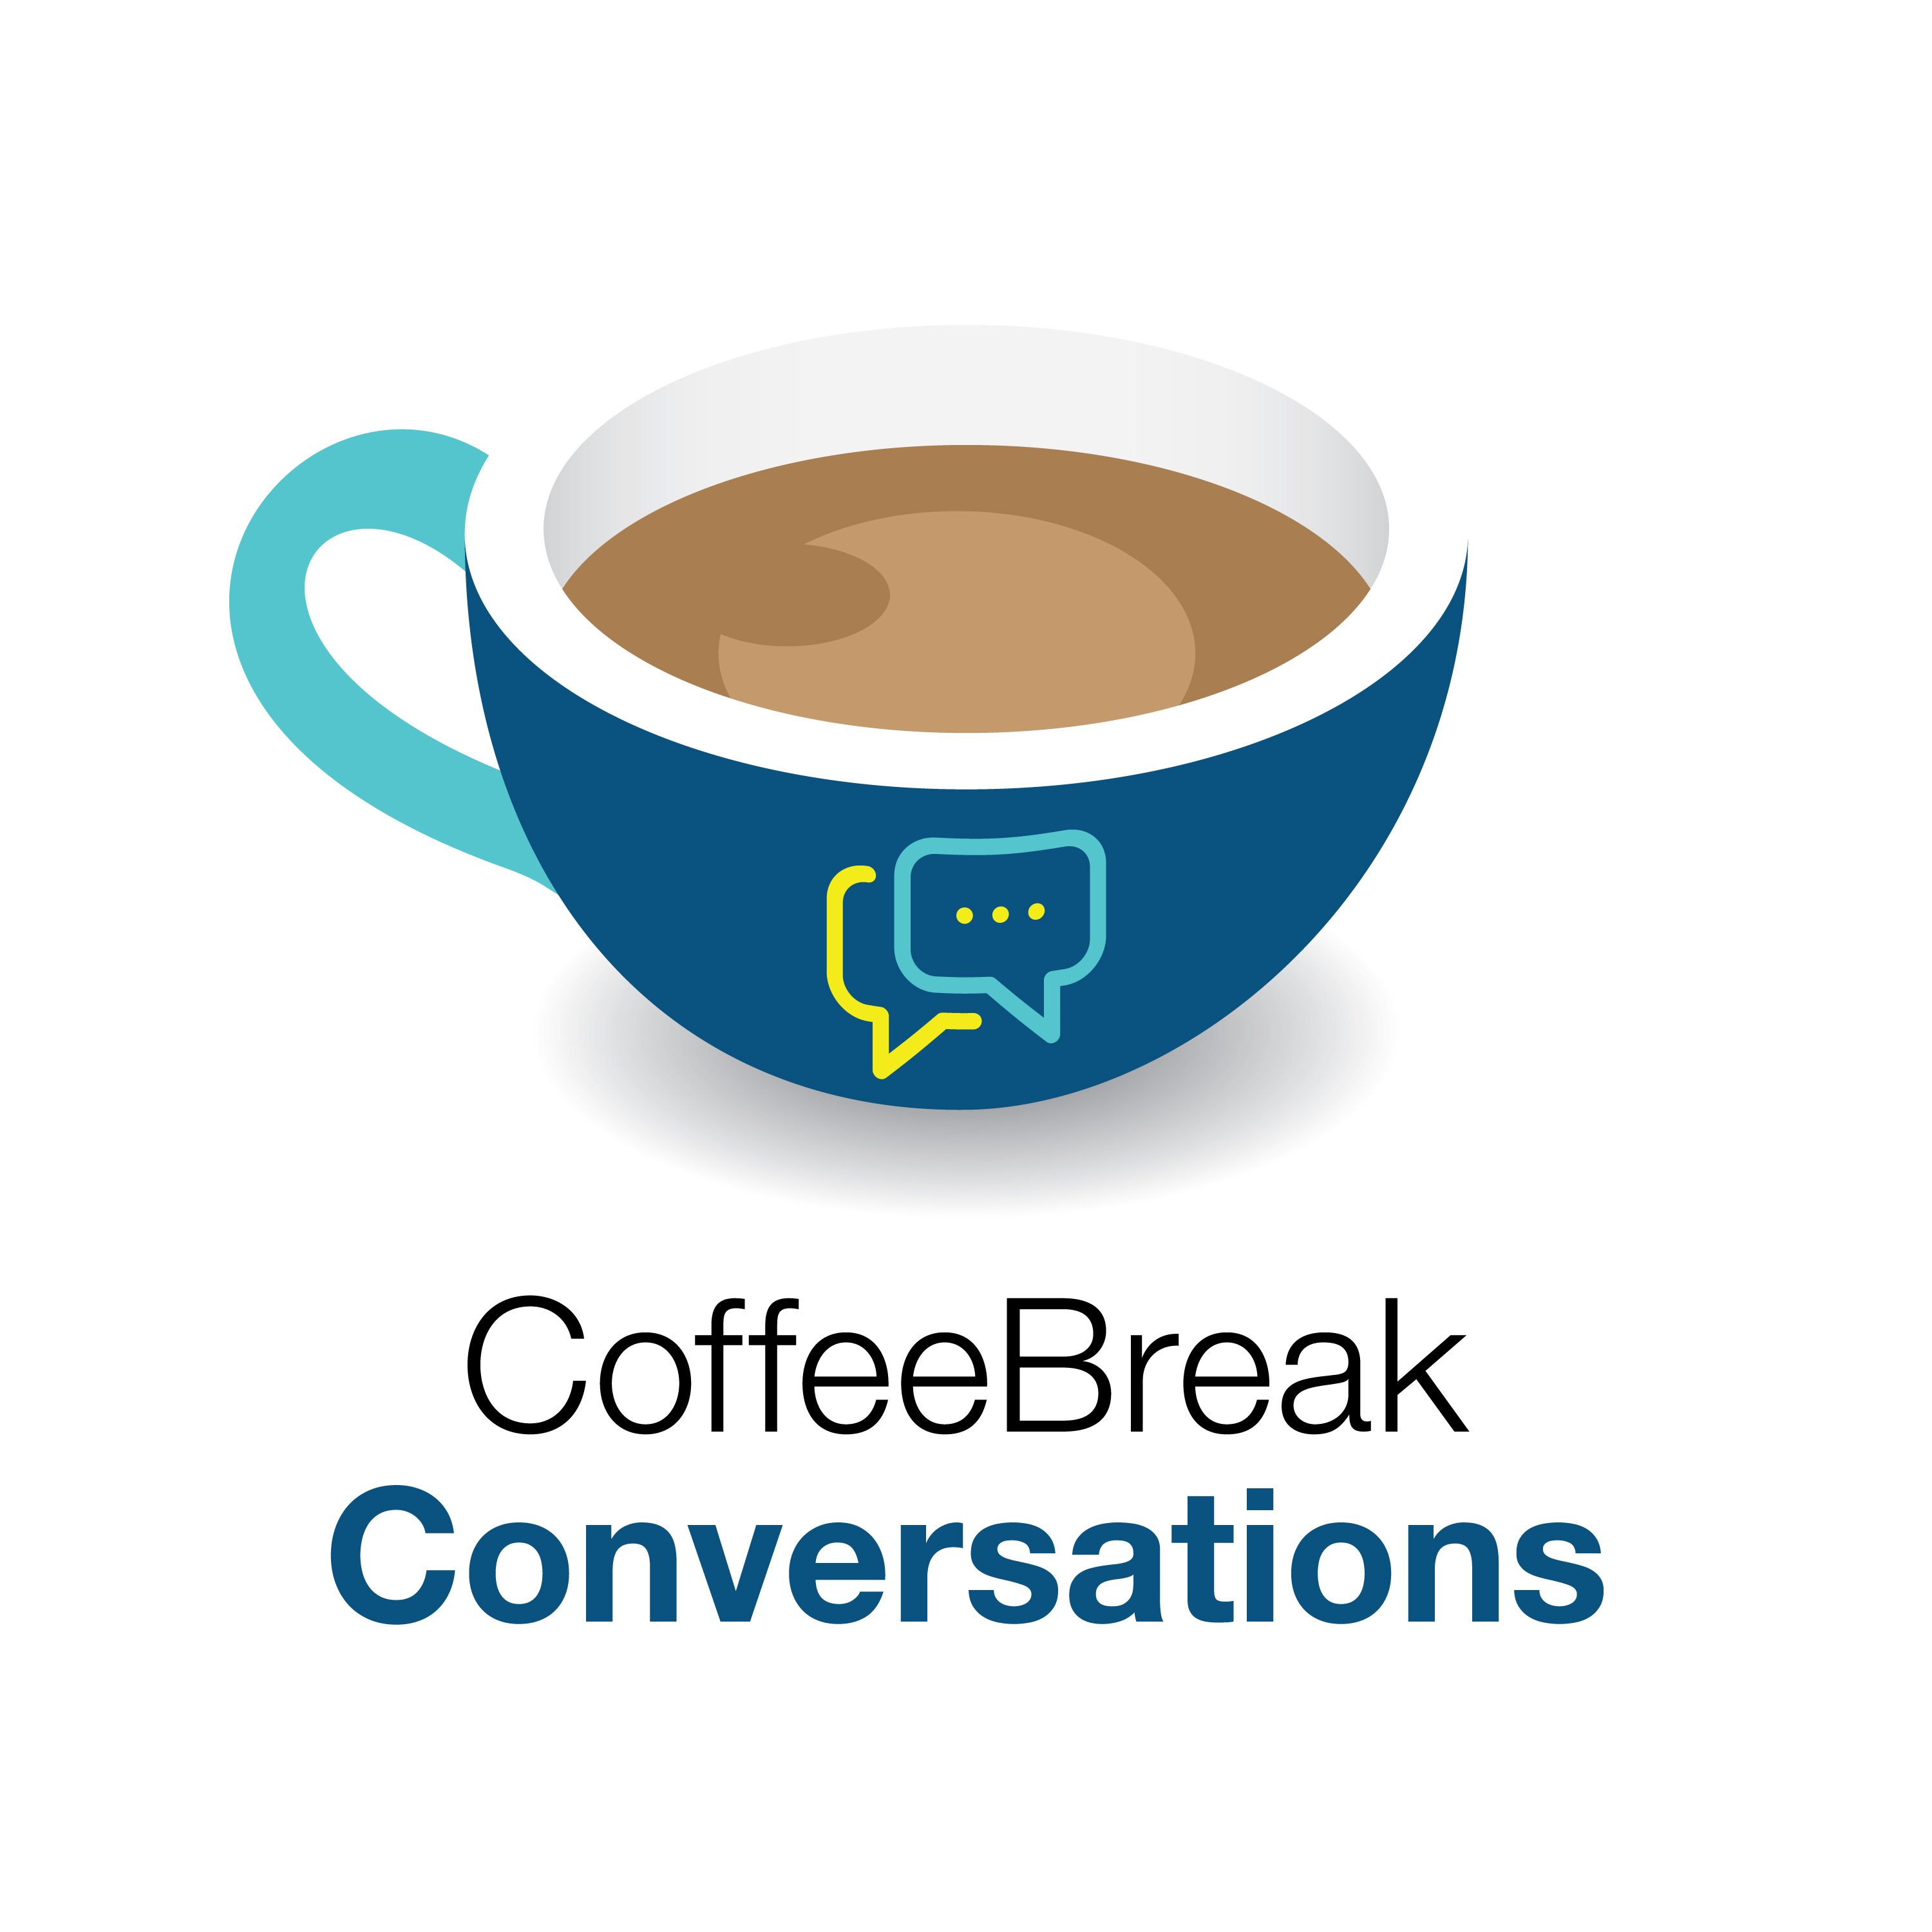 A Coffee Break Conversation with French learner Katherine